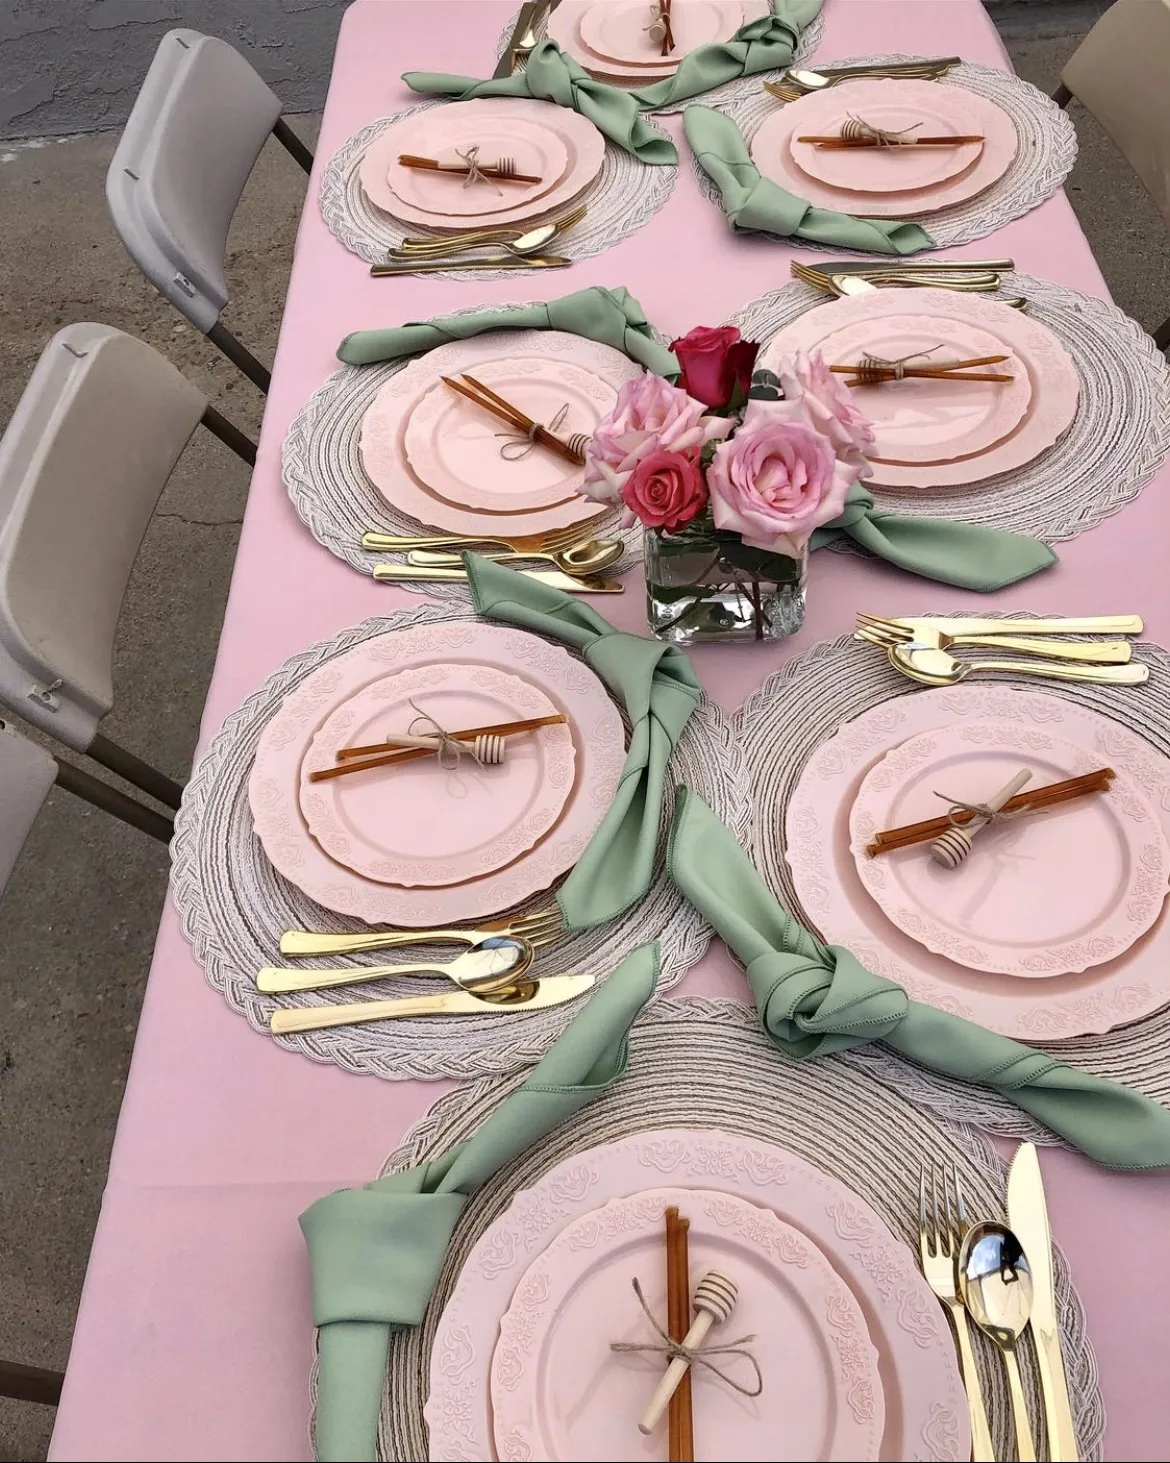 Pink Plates Plastic Flowers Top Angle View Dinner Table Setting